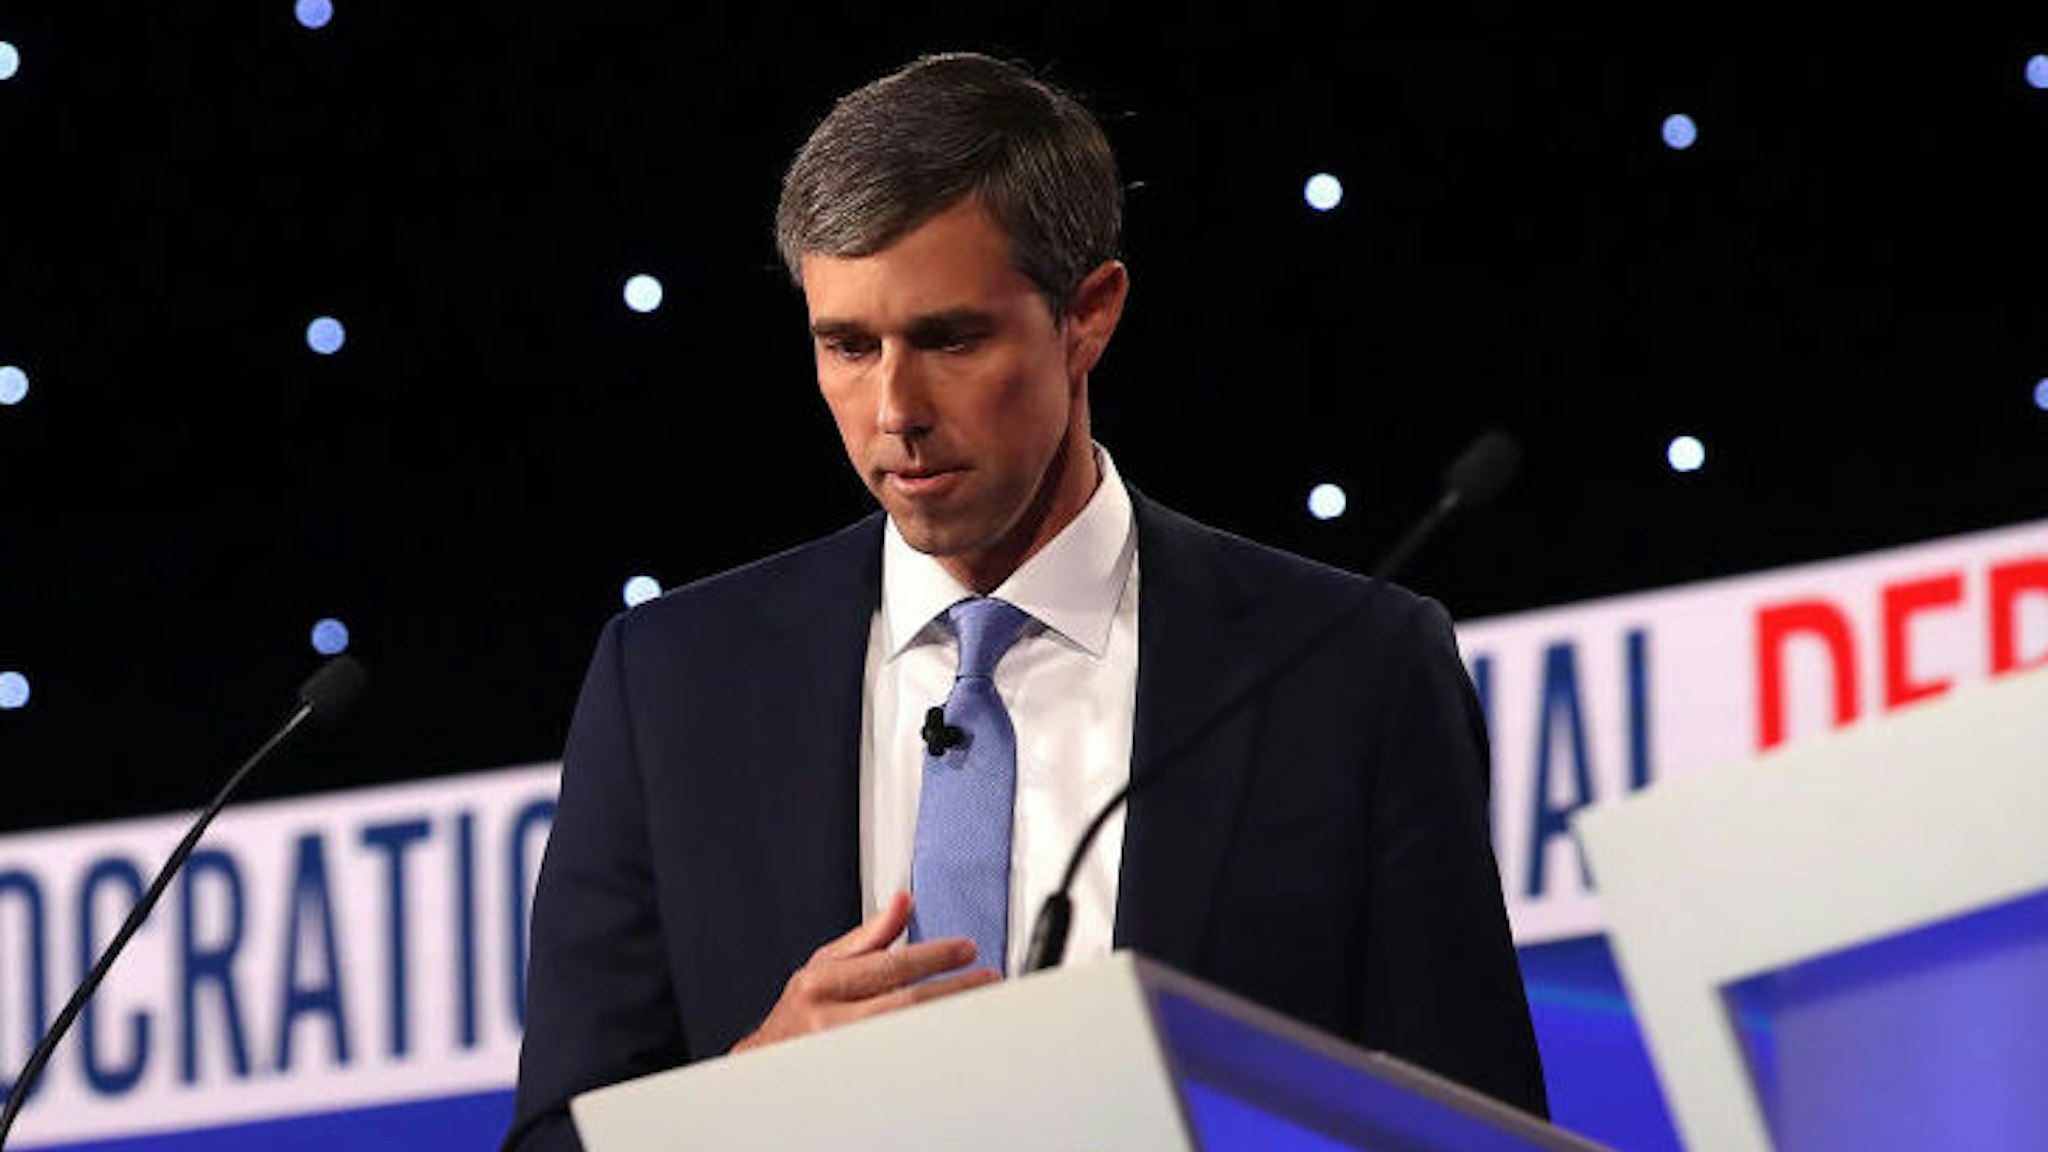 WESTERVILLE, OHIO - OCTOBER 15: Former Texas congressman Beto O'Rourke looks down during a break at the Democratic Presidential Debate at Otterbein University on October 15, 2019 in Westerville, Ohio. A record 12 presidential hopefuls are participating in the debate hosted by CNN and The New York Times. (